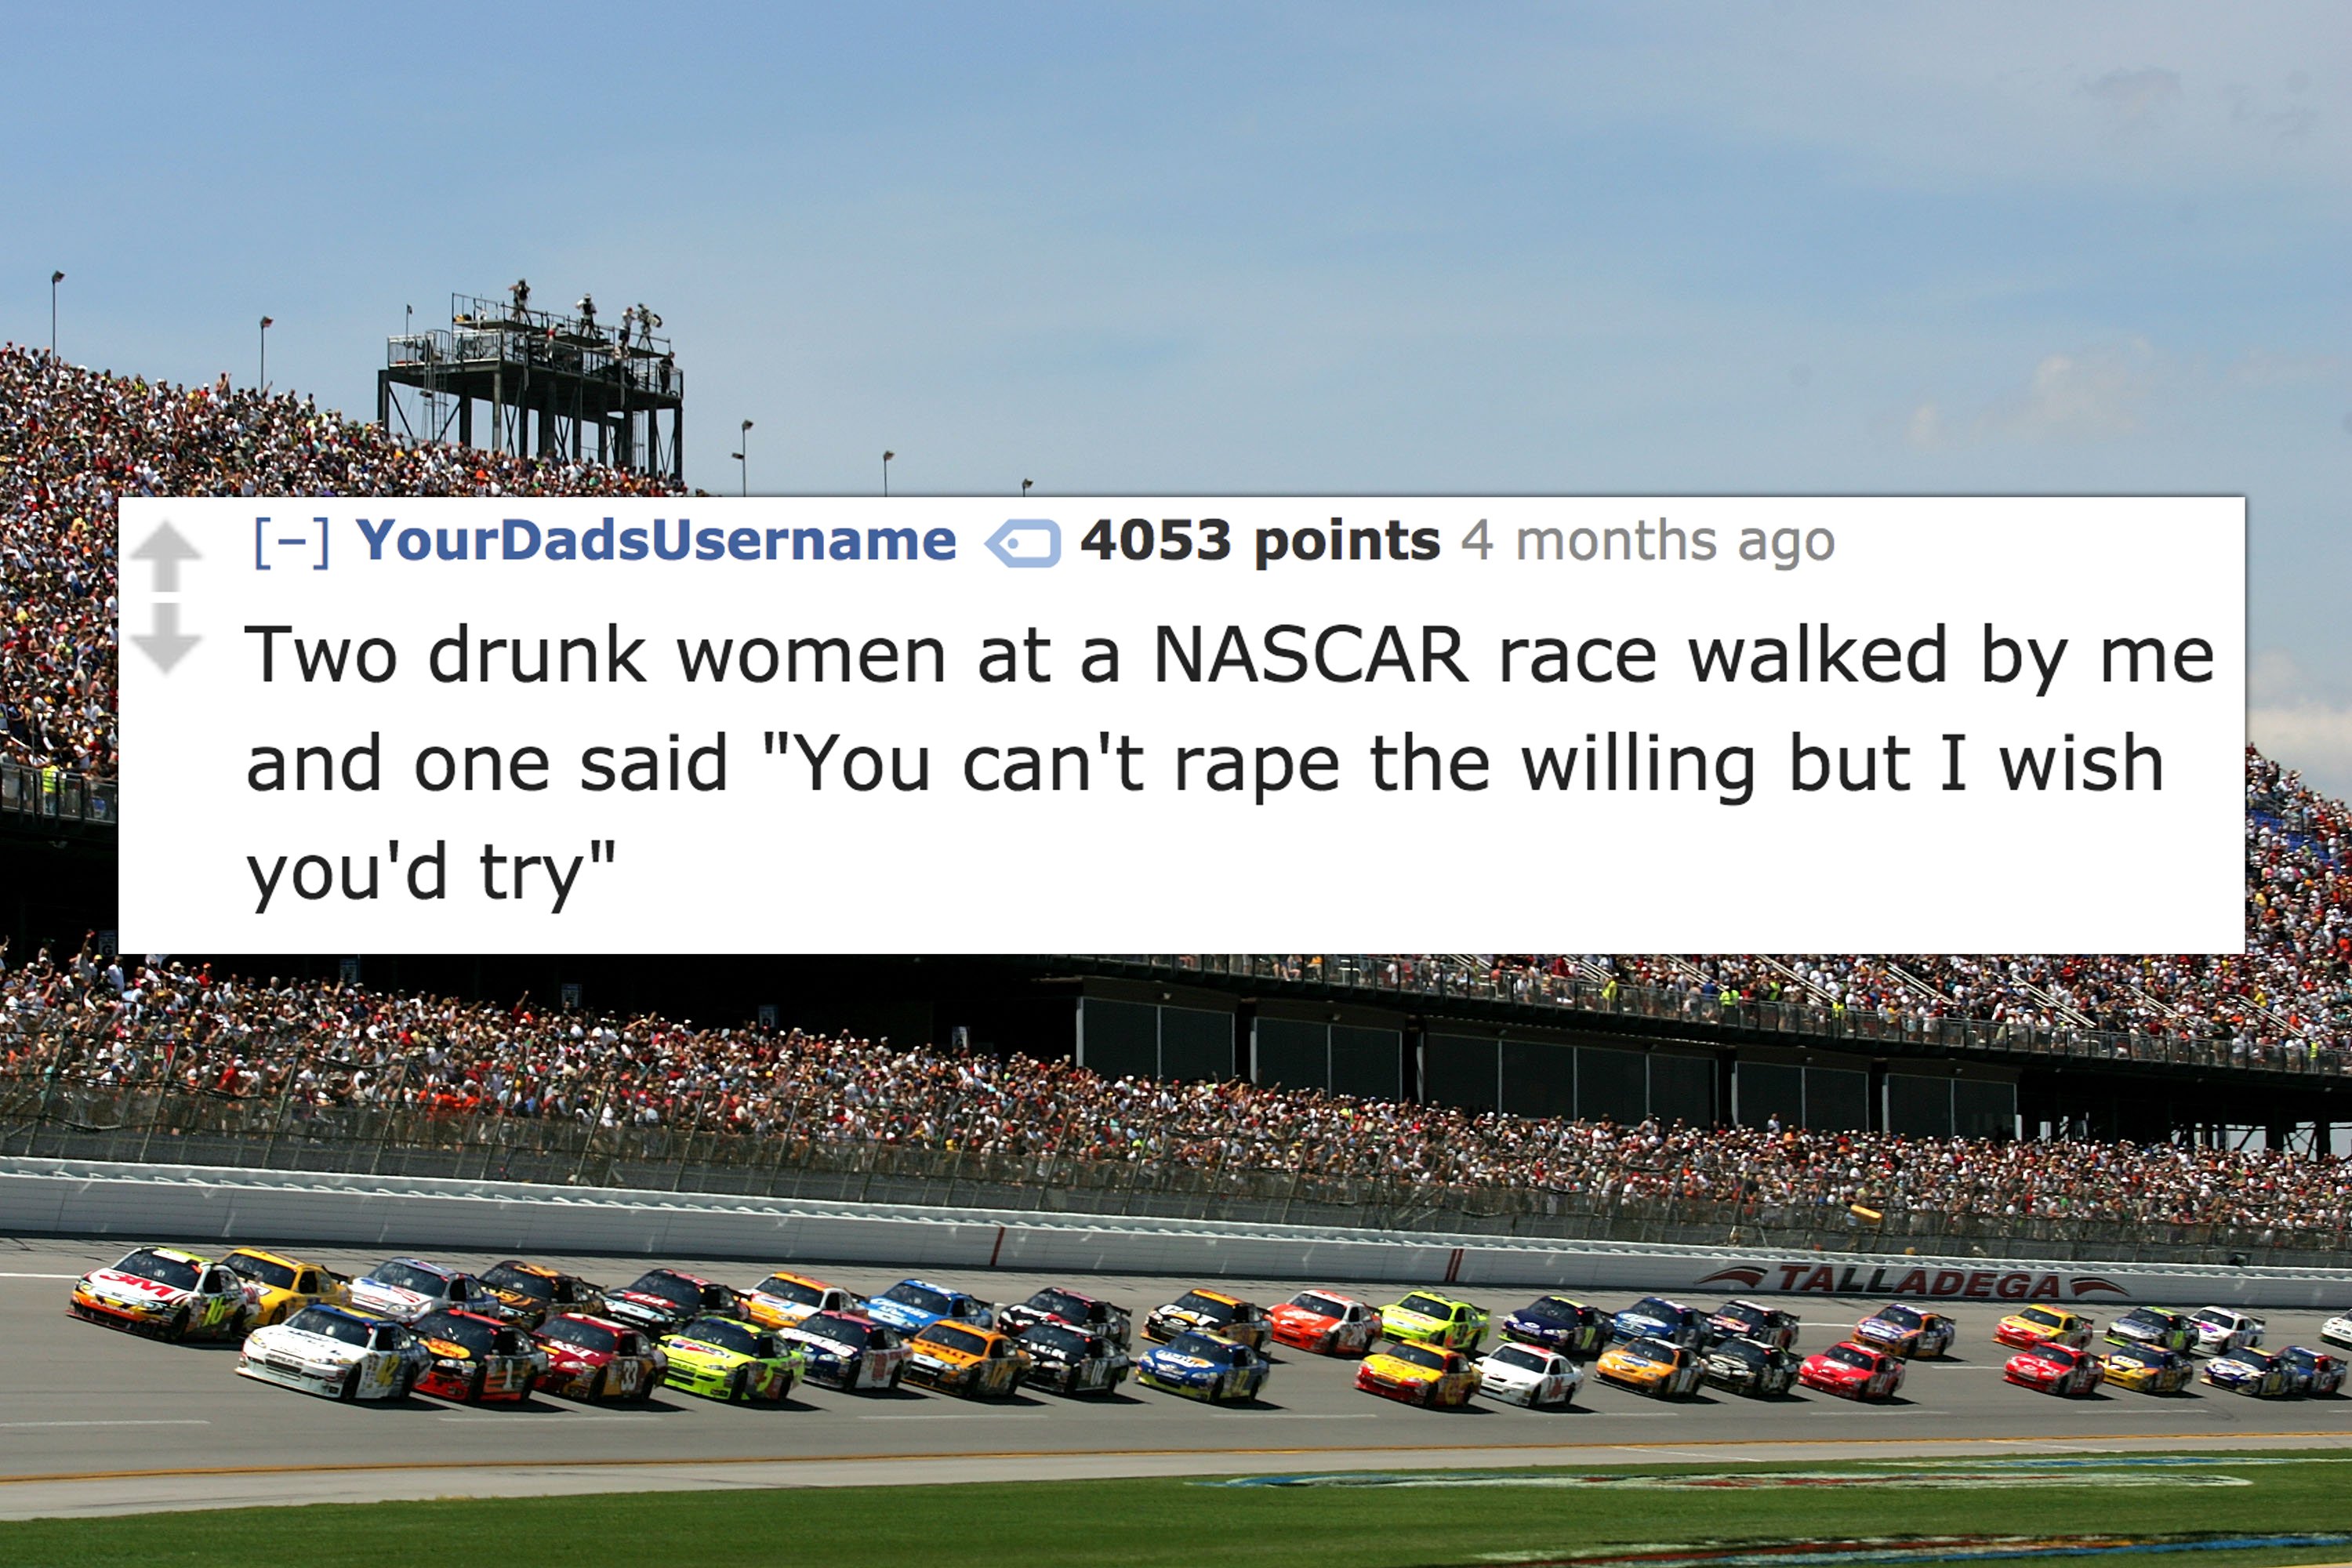 nascar crowd - Your DadsUsername 4053 points 4 months ago Two drunk women at a Nascar race walked by me and one said "You can't rape the willing but I wish you'd try"